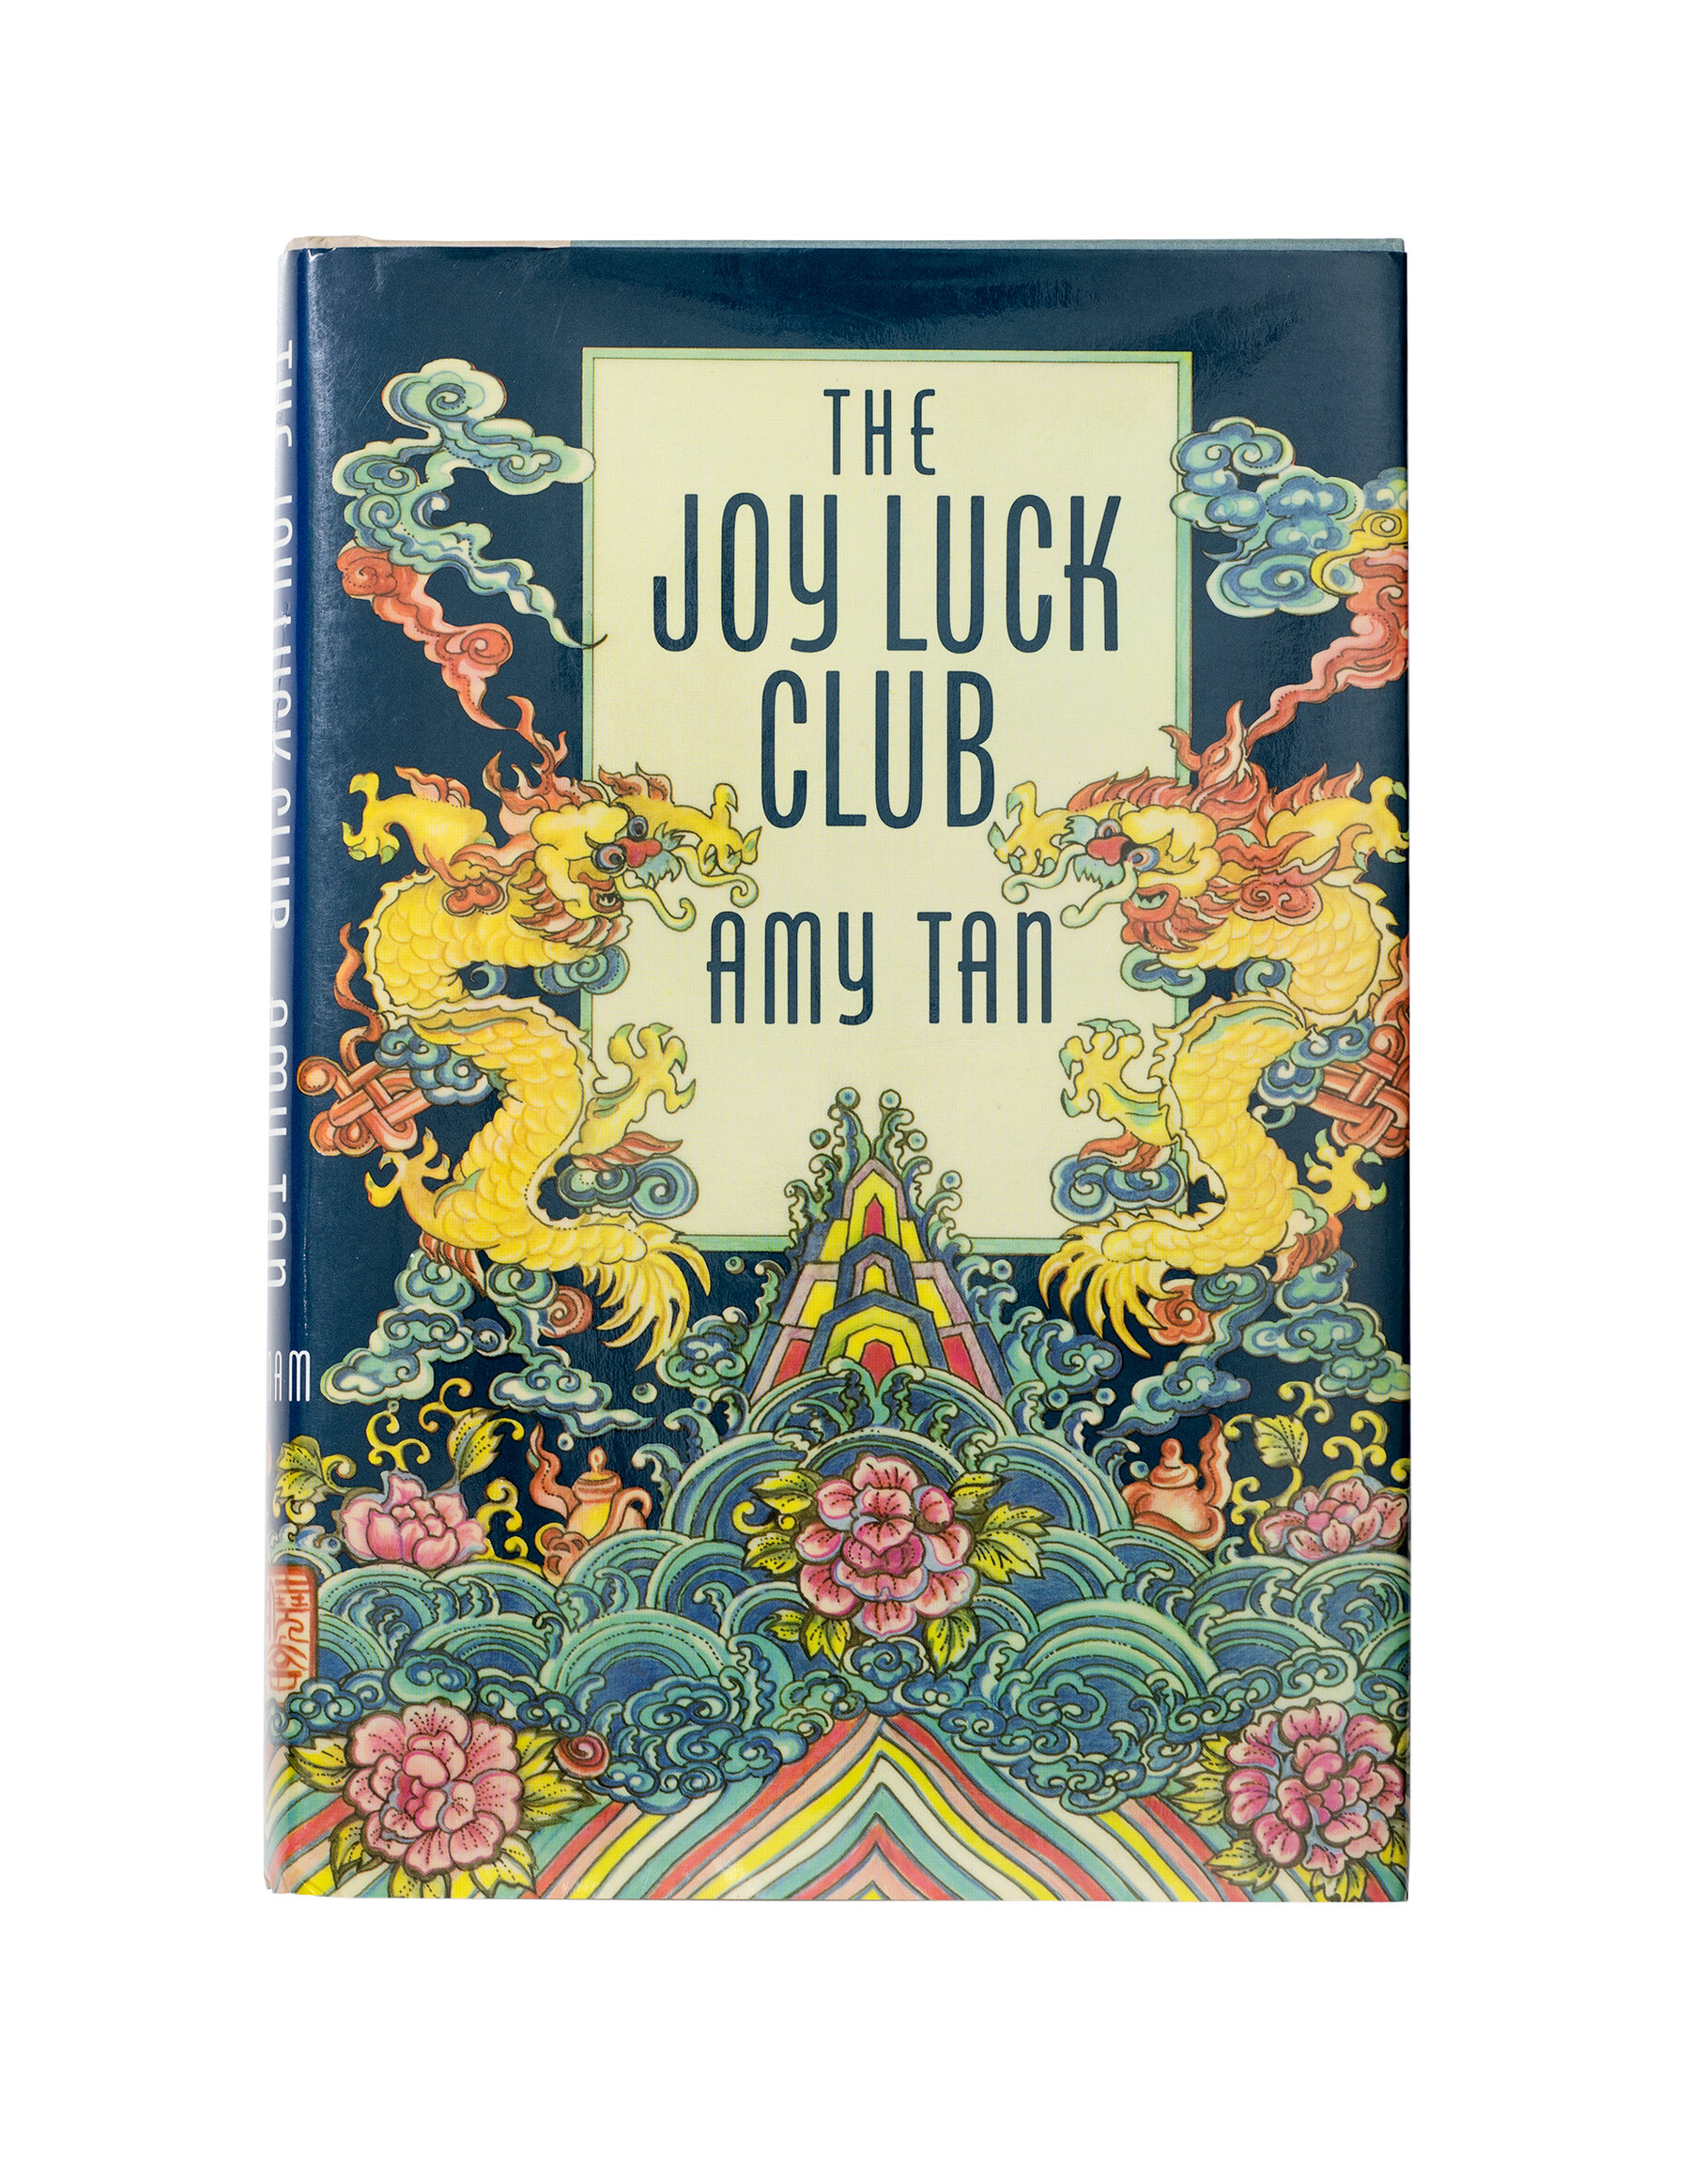 A cover of the book "The Joy Luck Club" with illustrations of dragons and a mirrored cloud-like pattern.